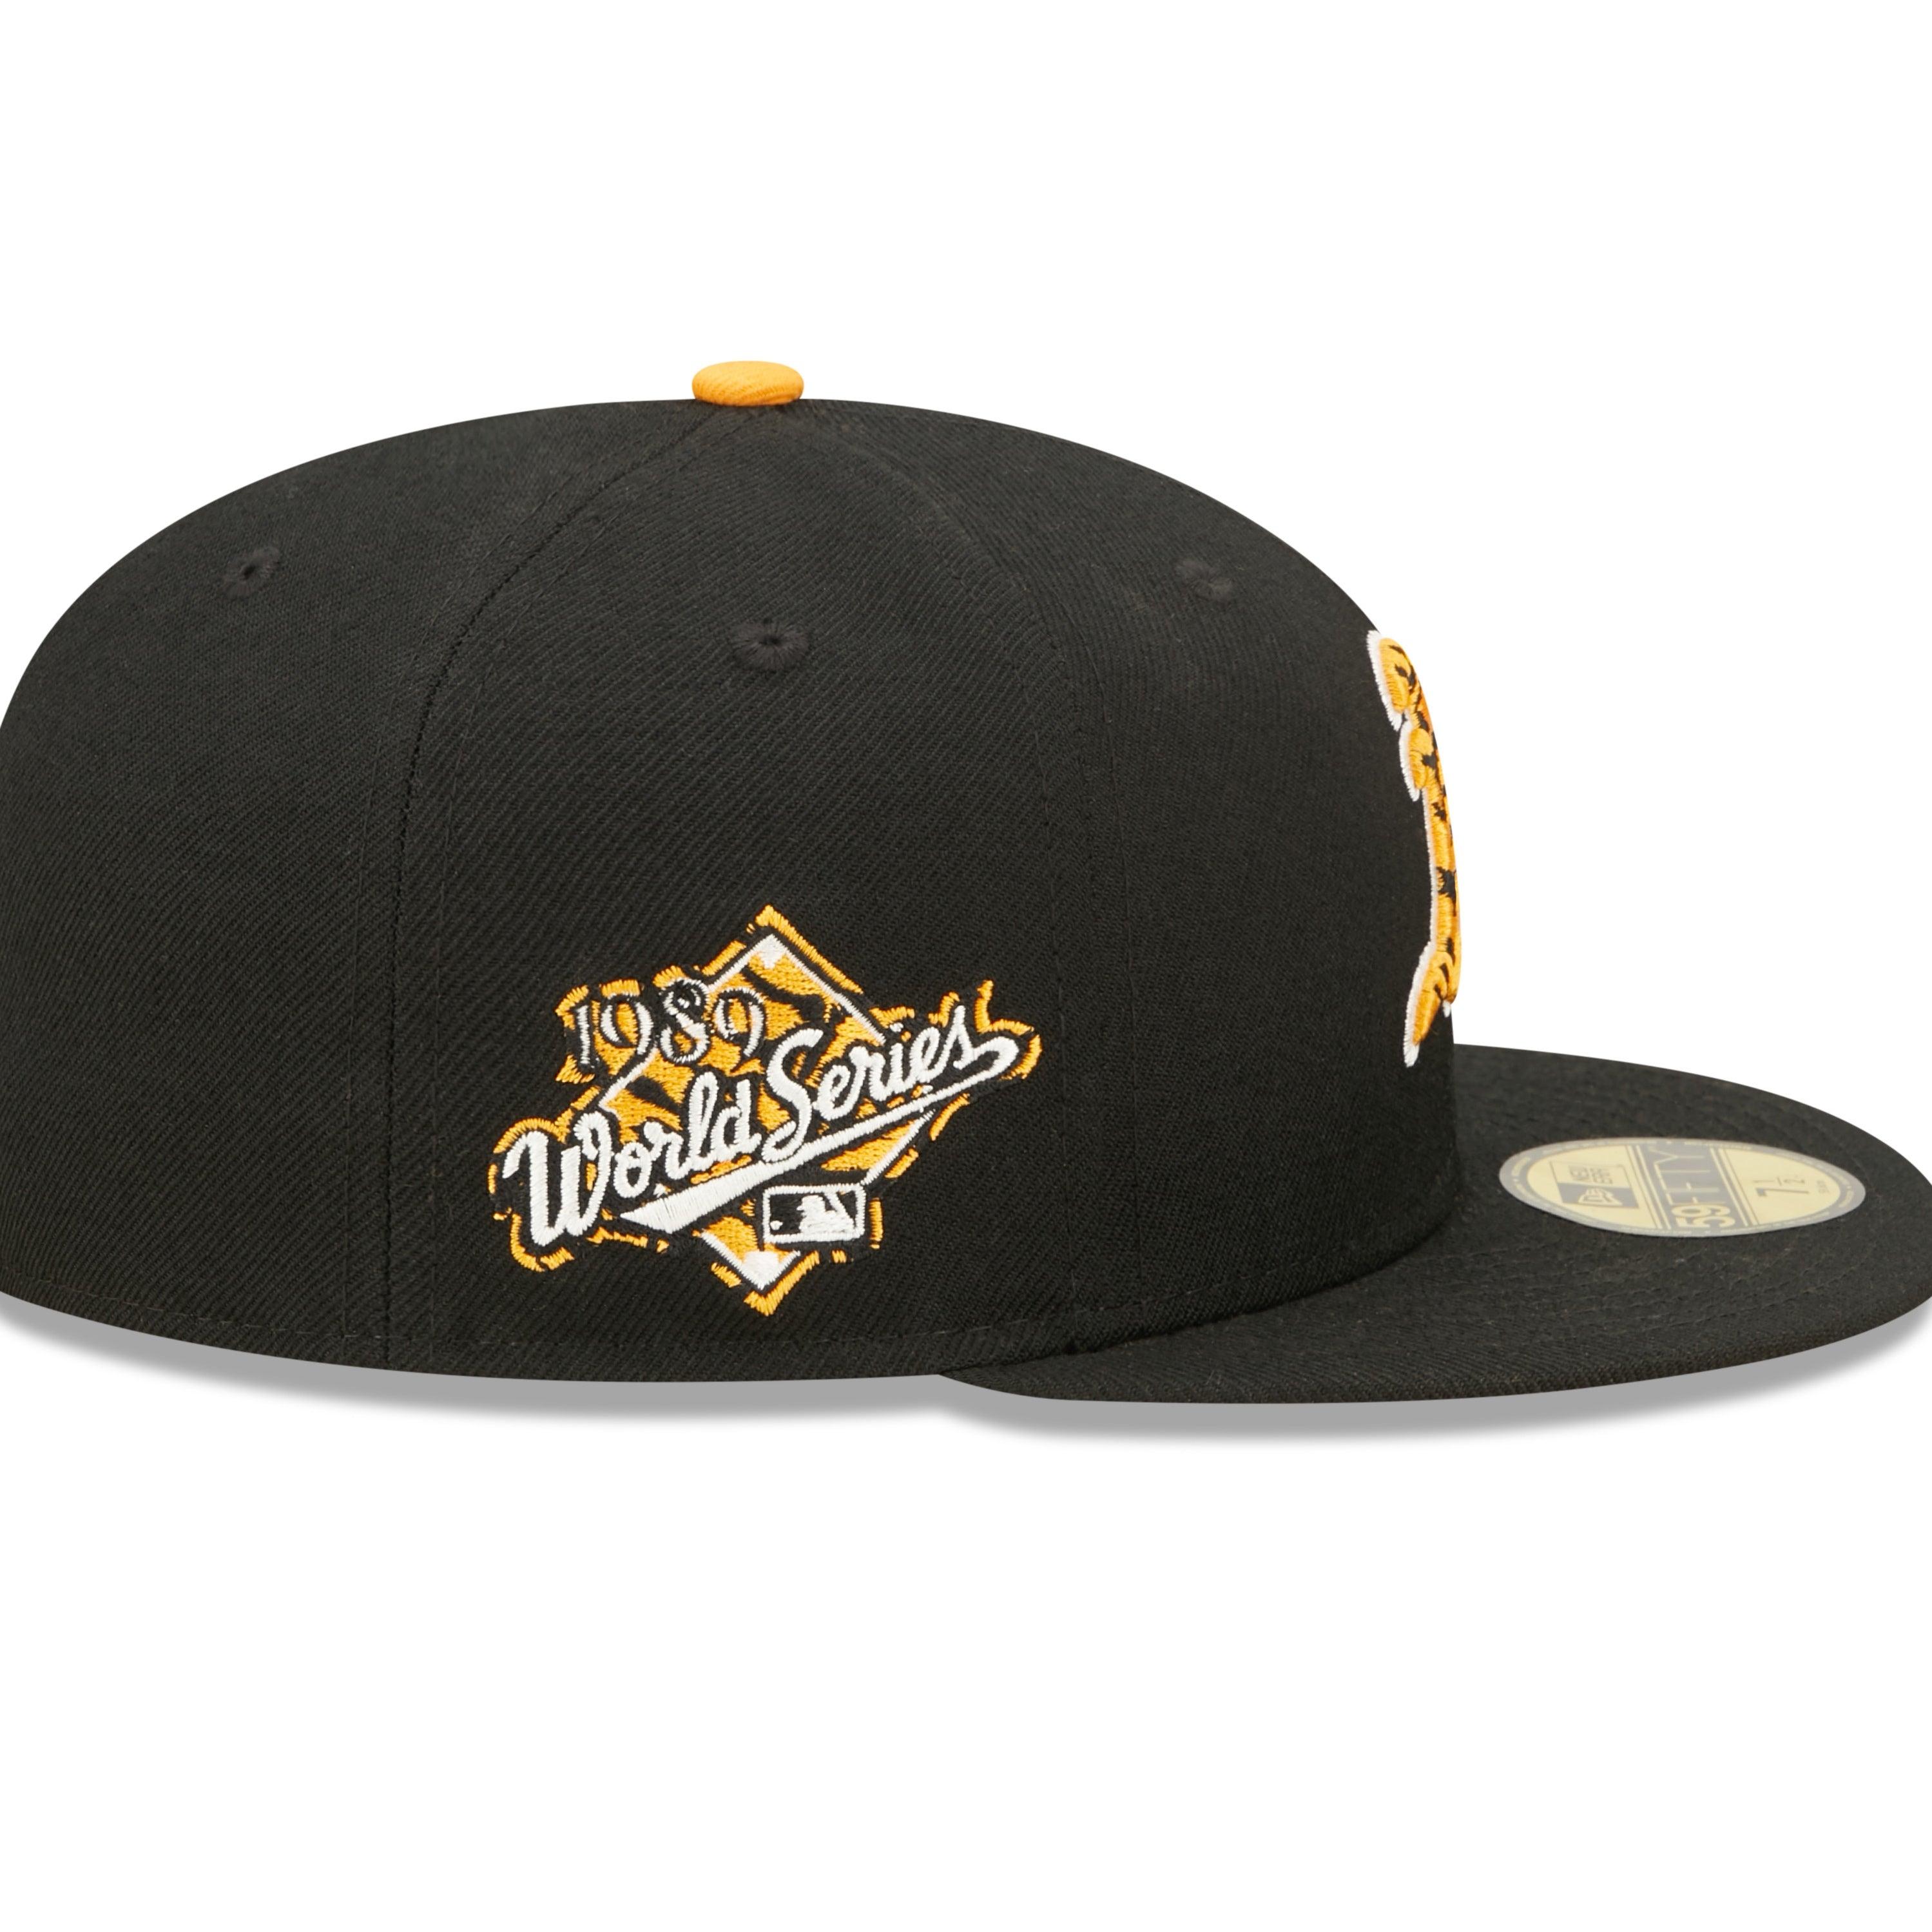 NEW ERA 59FIFTY WORLD SERIES 1989 MLB OAKLAND ATHLETICS TIGERFILL FITTED CAP - FAM